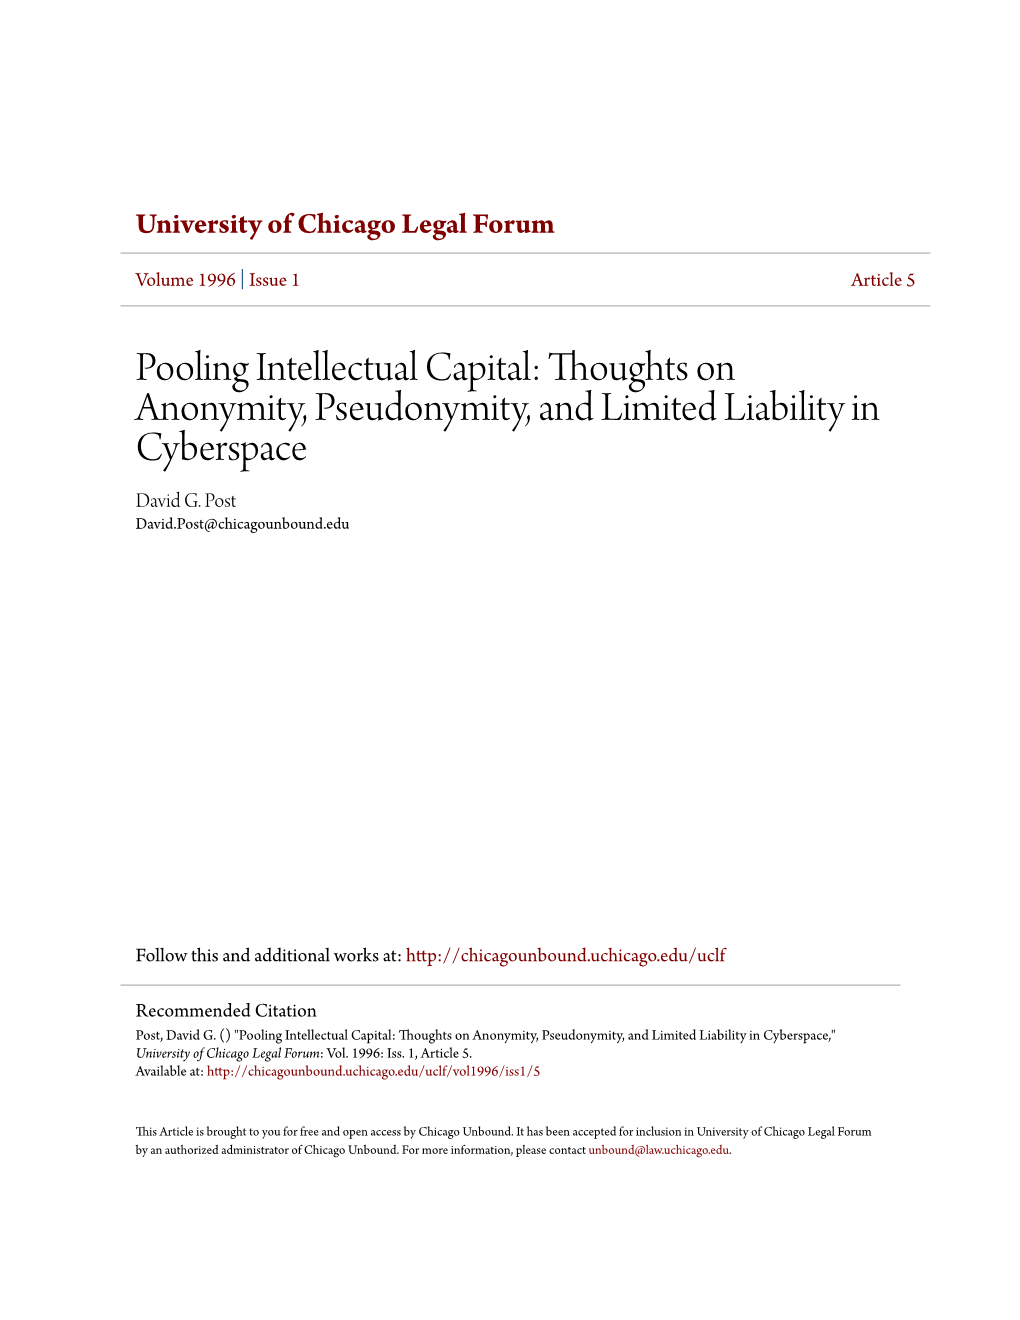 Pooling Intellectual Capital: Thoughts on Anonymity, Pseudonymity, and Limited Liability in Cyberspace David G